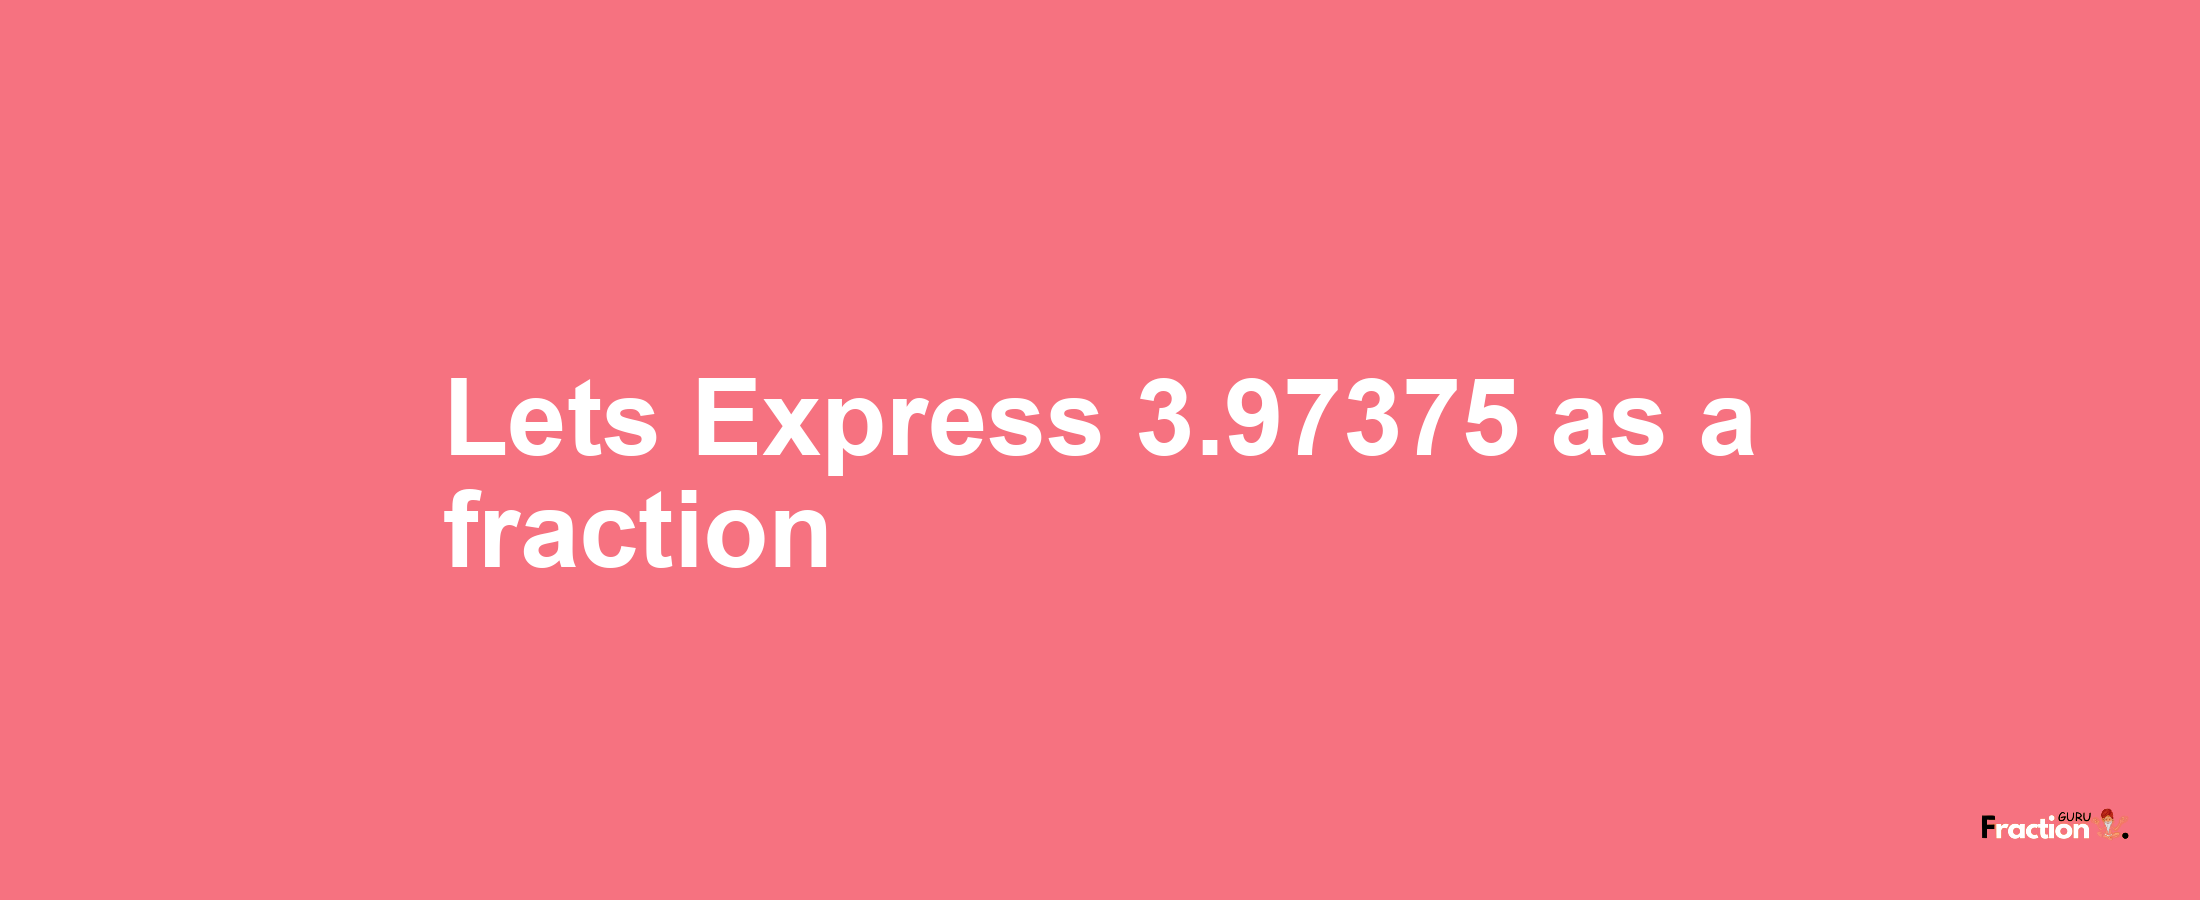 Lets Express 3.97375 as afraction